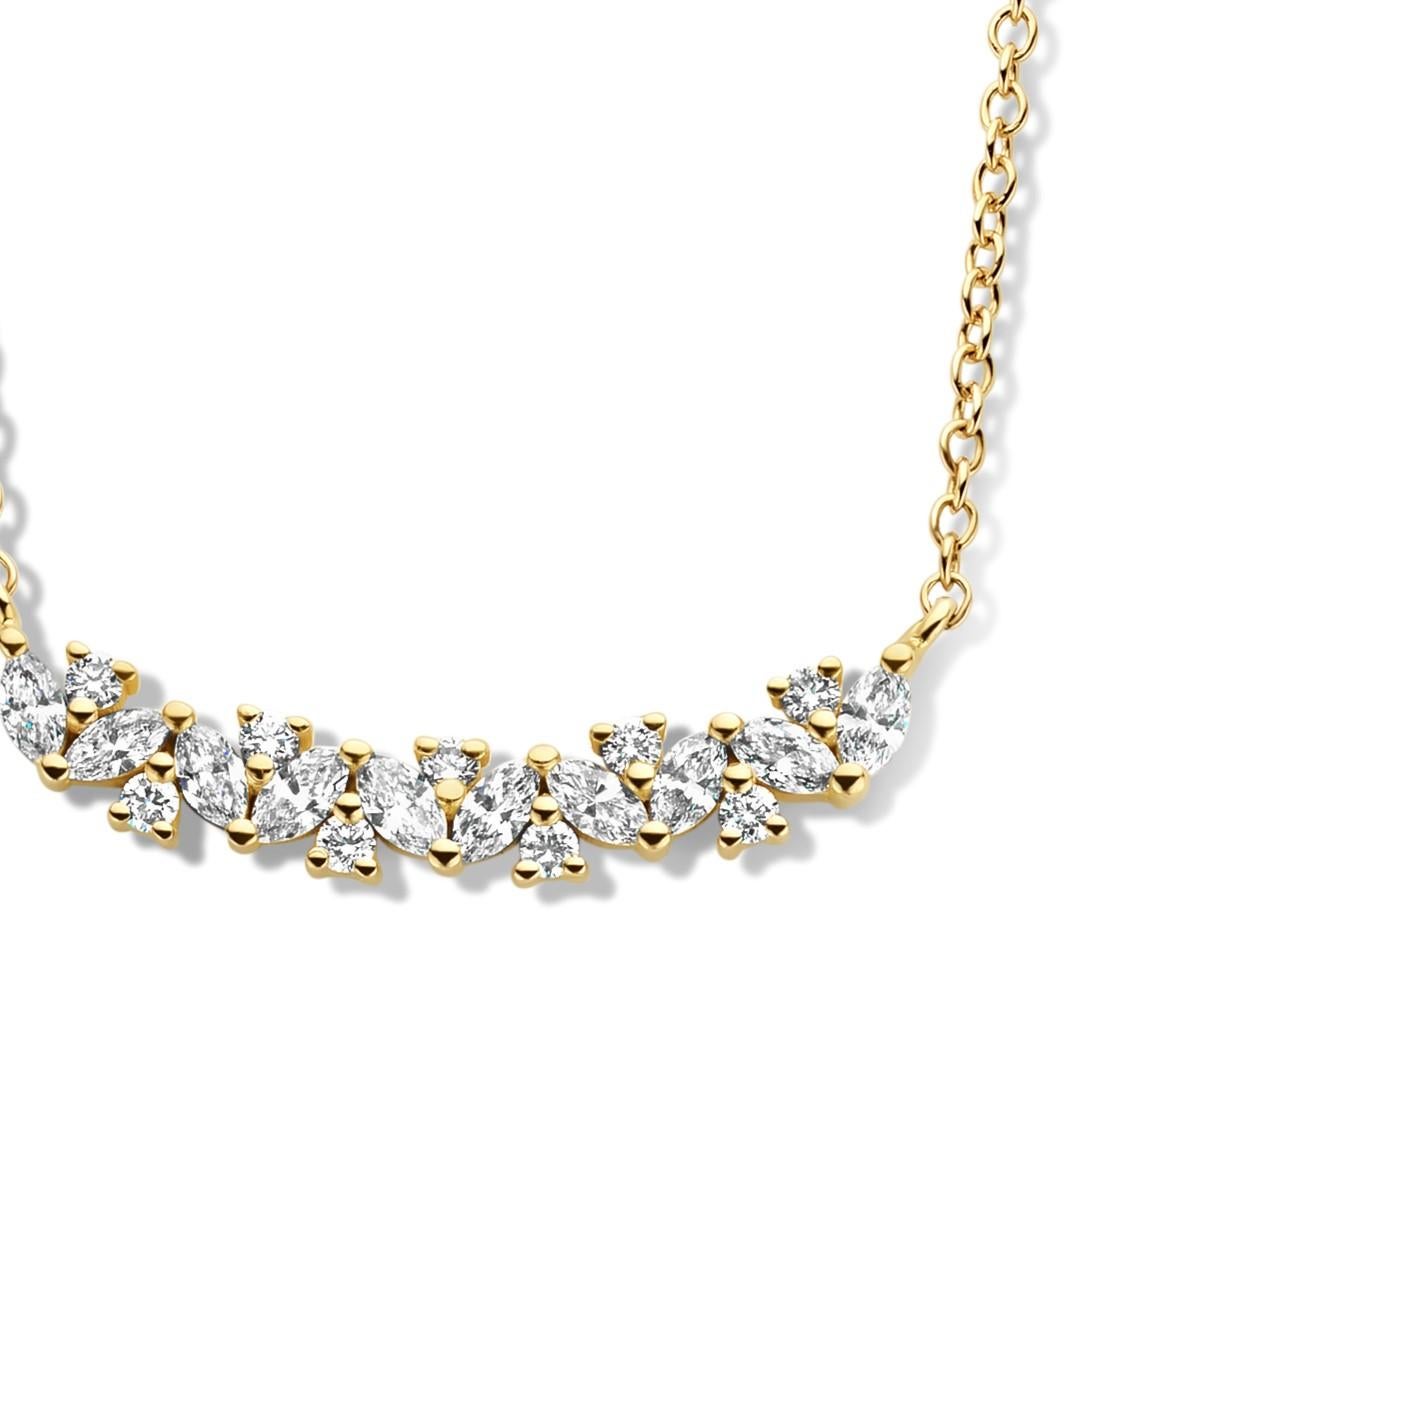 18K yellow gold necklace has a rolo chain and is set with the finest diamonds in F/G-VS quality.  In this necklace, you have 10 marquise diamonds and 9 brilliant cut diamonds. Also, available in 18K white gold and 18K yellow gold.

The 18K yellow